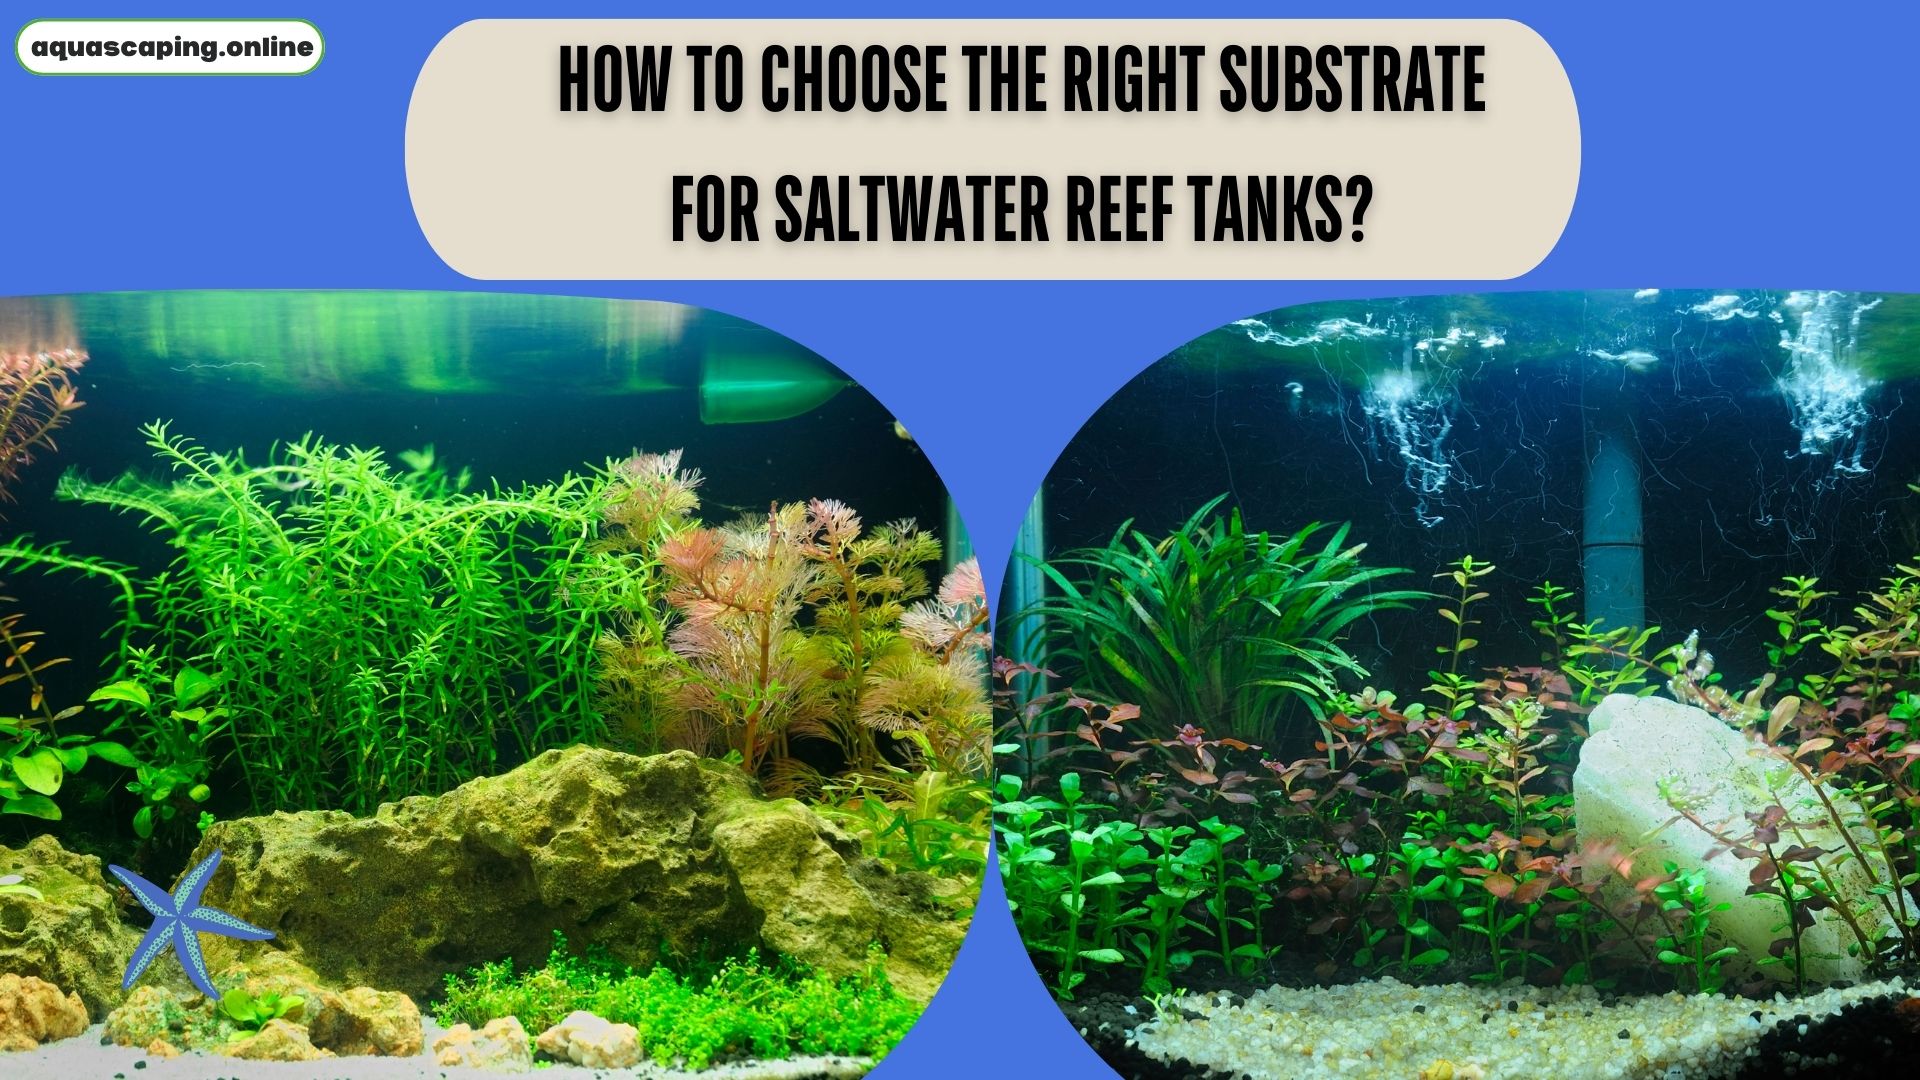 The right substrate for saltwater reef tanks